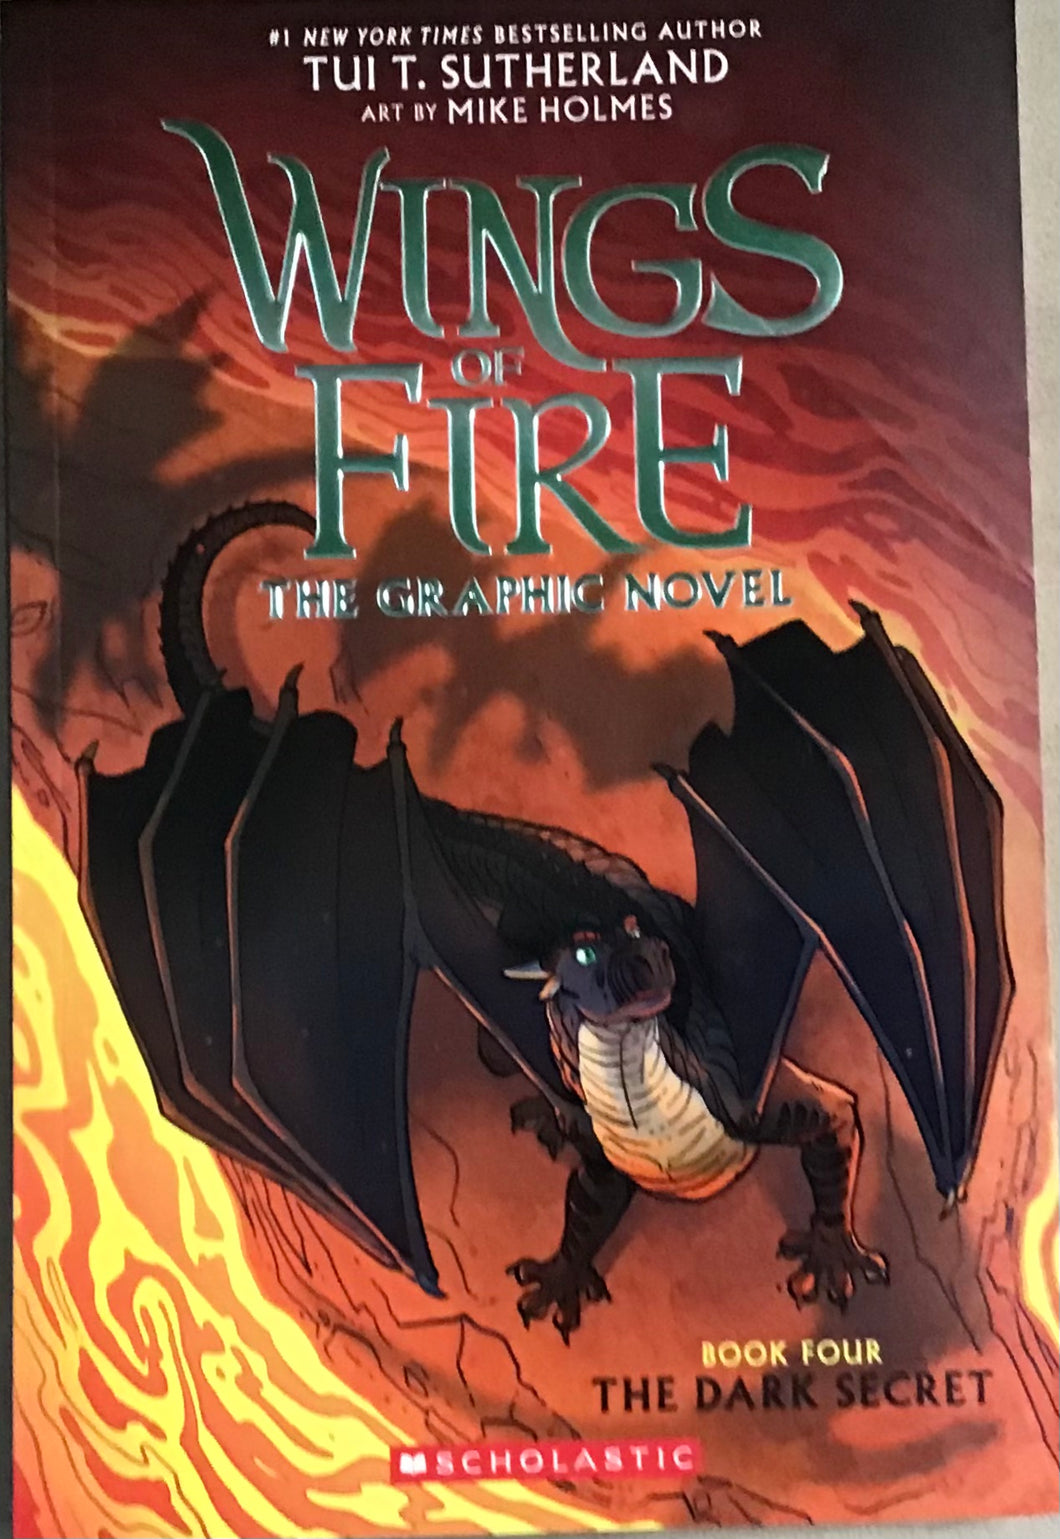 Wings of Fire, Tui T. Sutherland